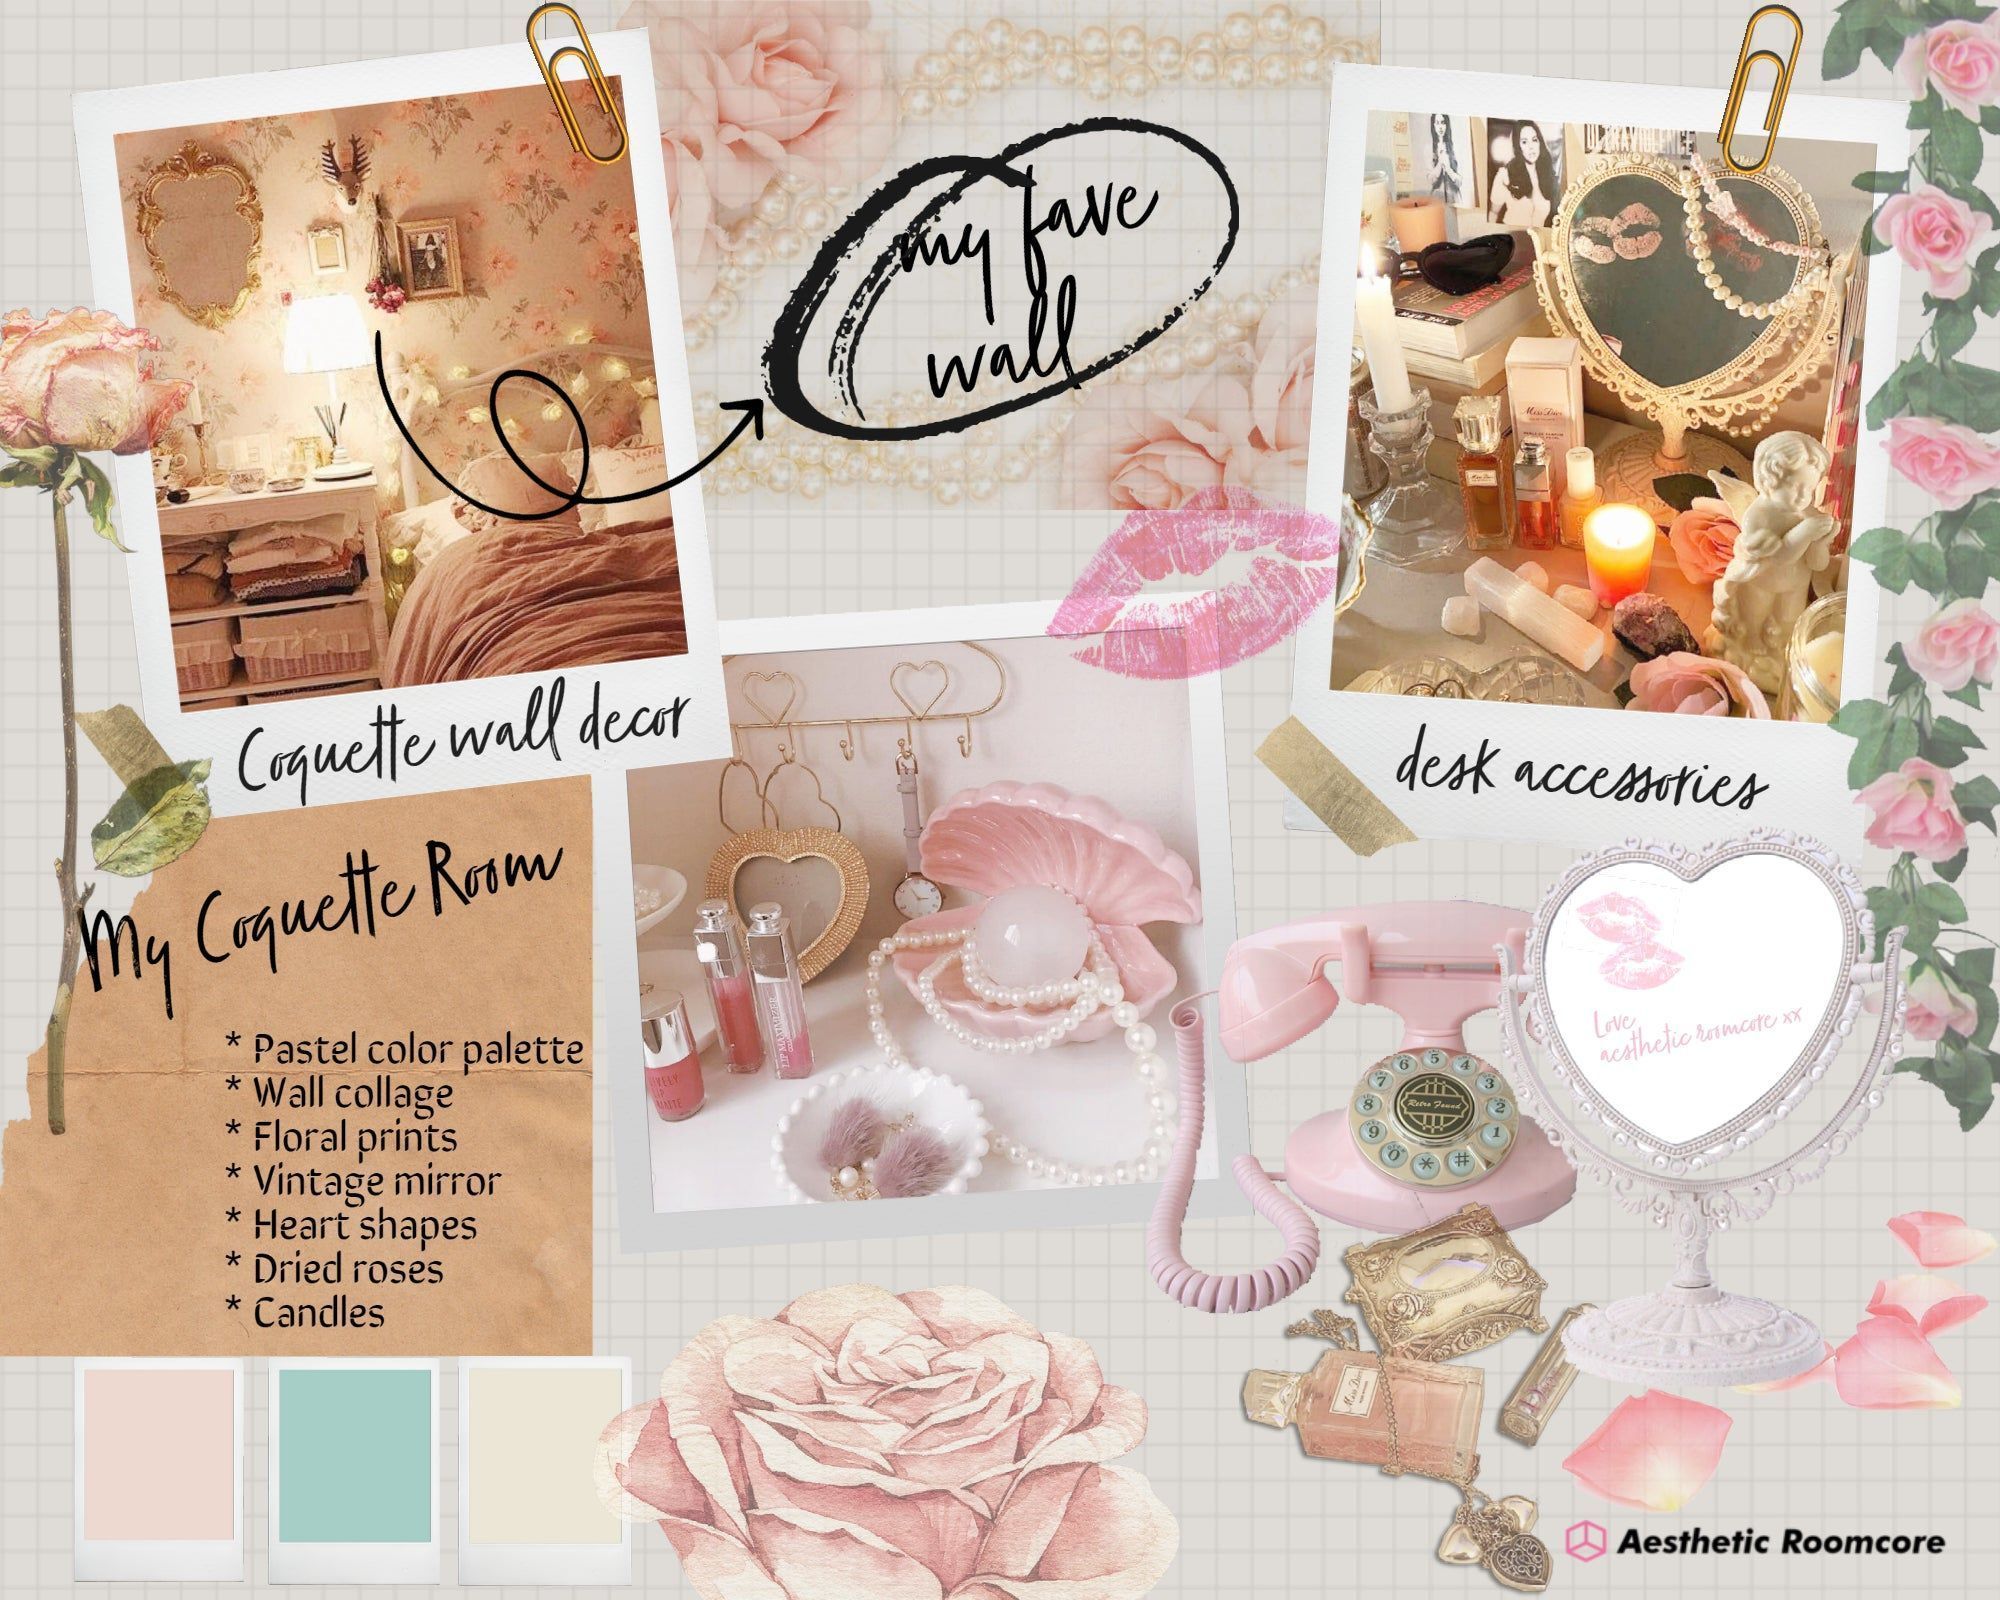 A collage of pictures with flowers and other items - Coquette